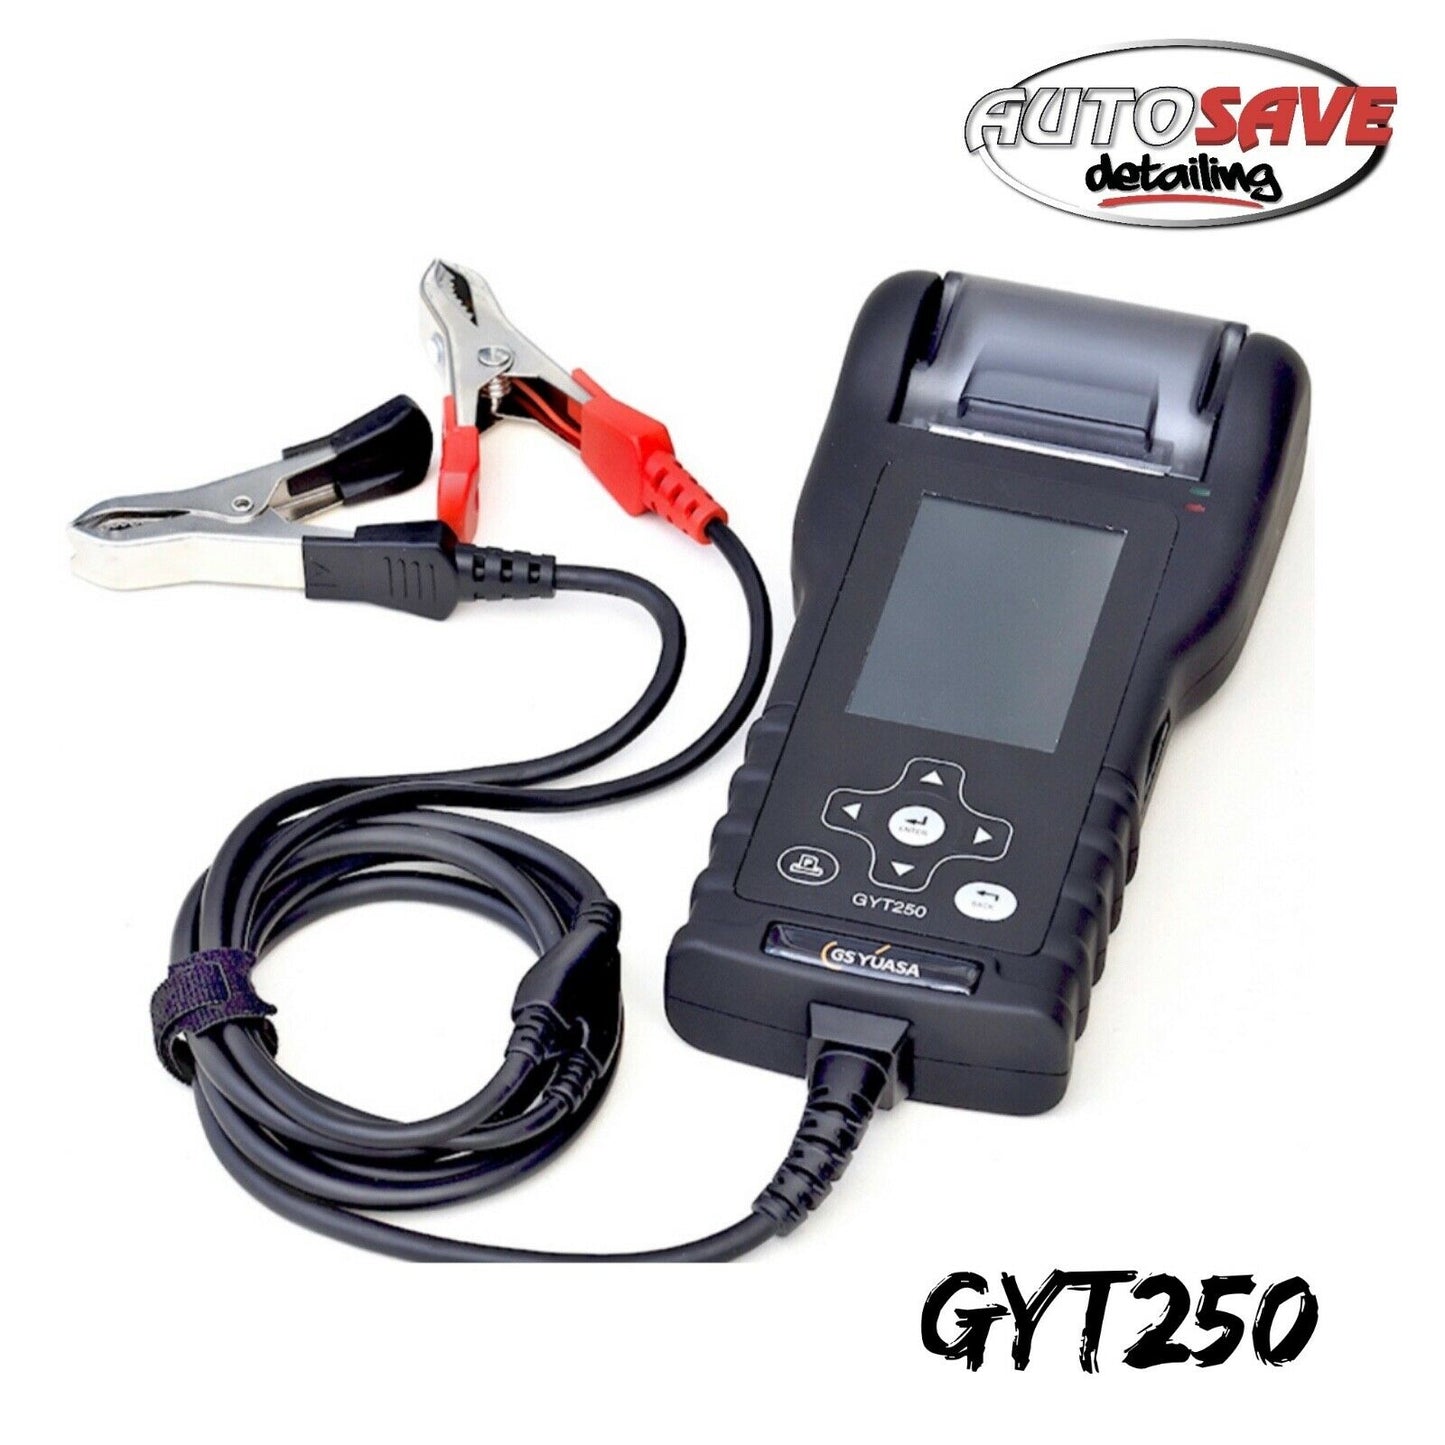 Yuasa GYT250 Automotice Battery & Electrical System Tester for Car & Motorcycle